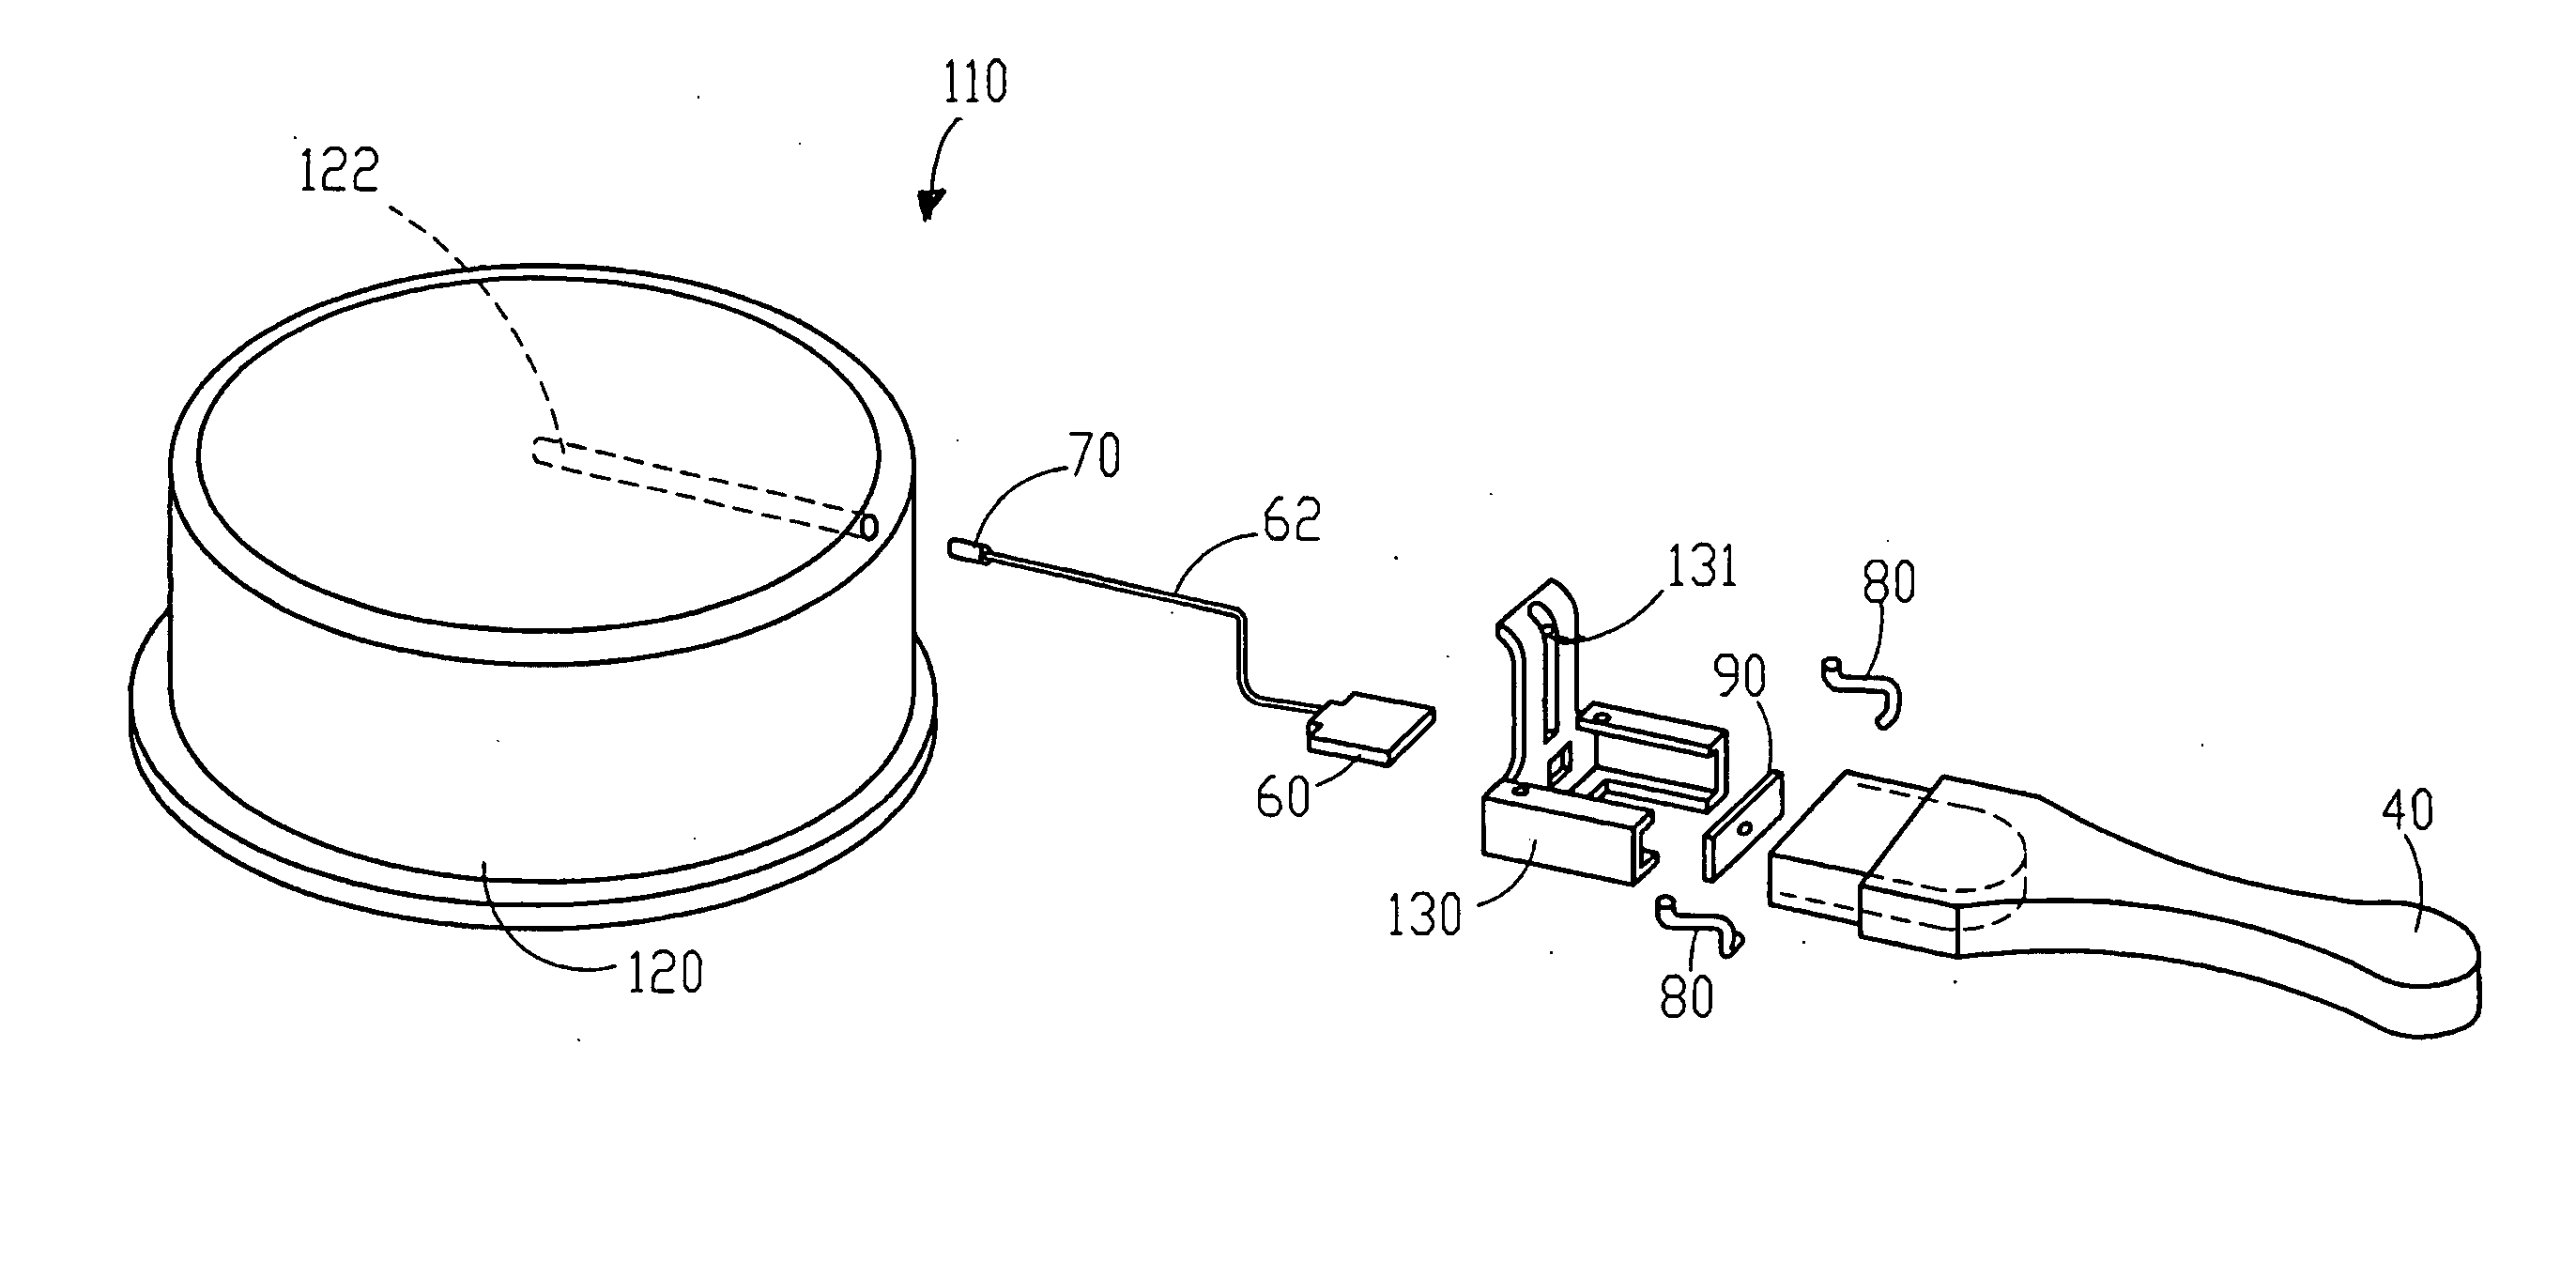 Tag assembly for radio frequency identification controlled heatable objects